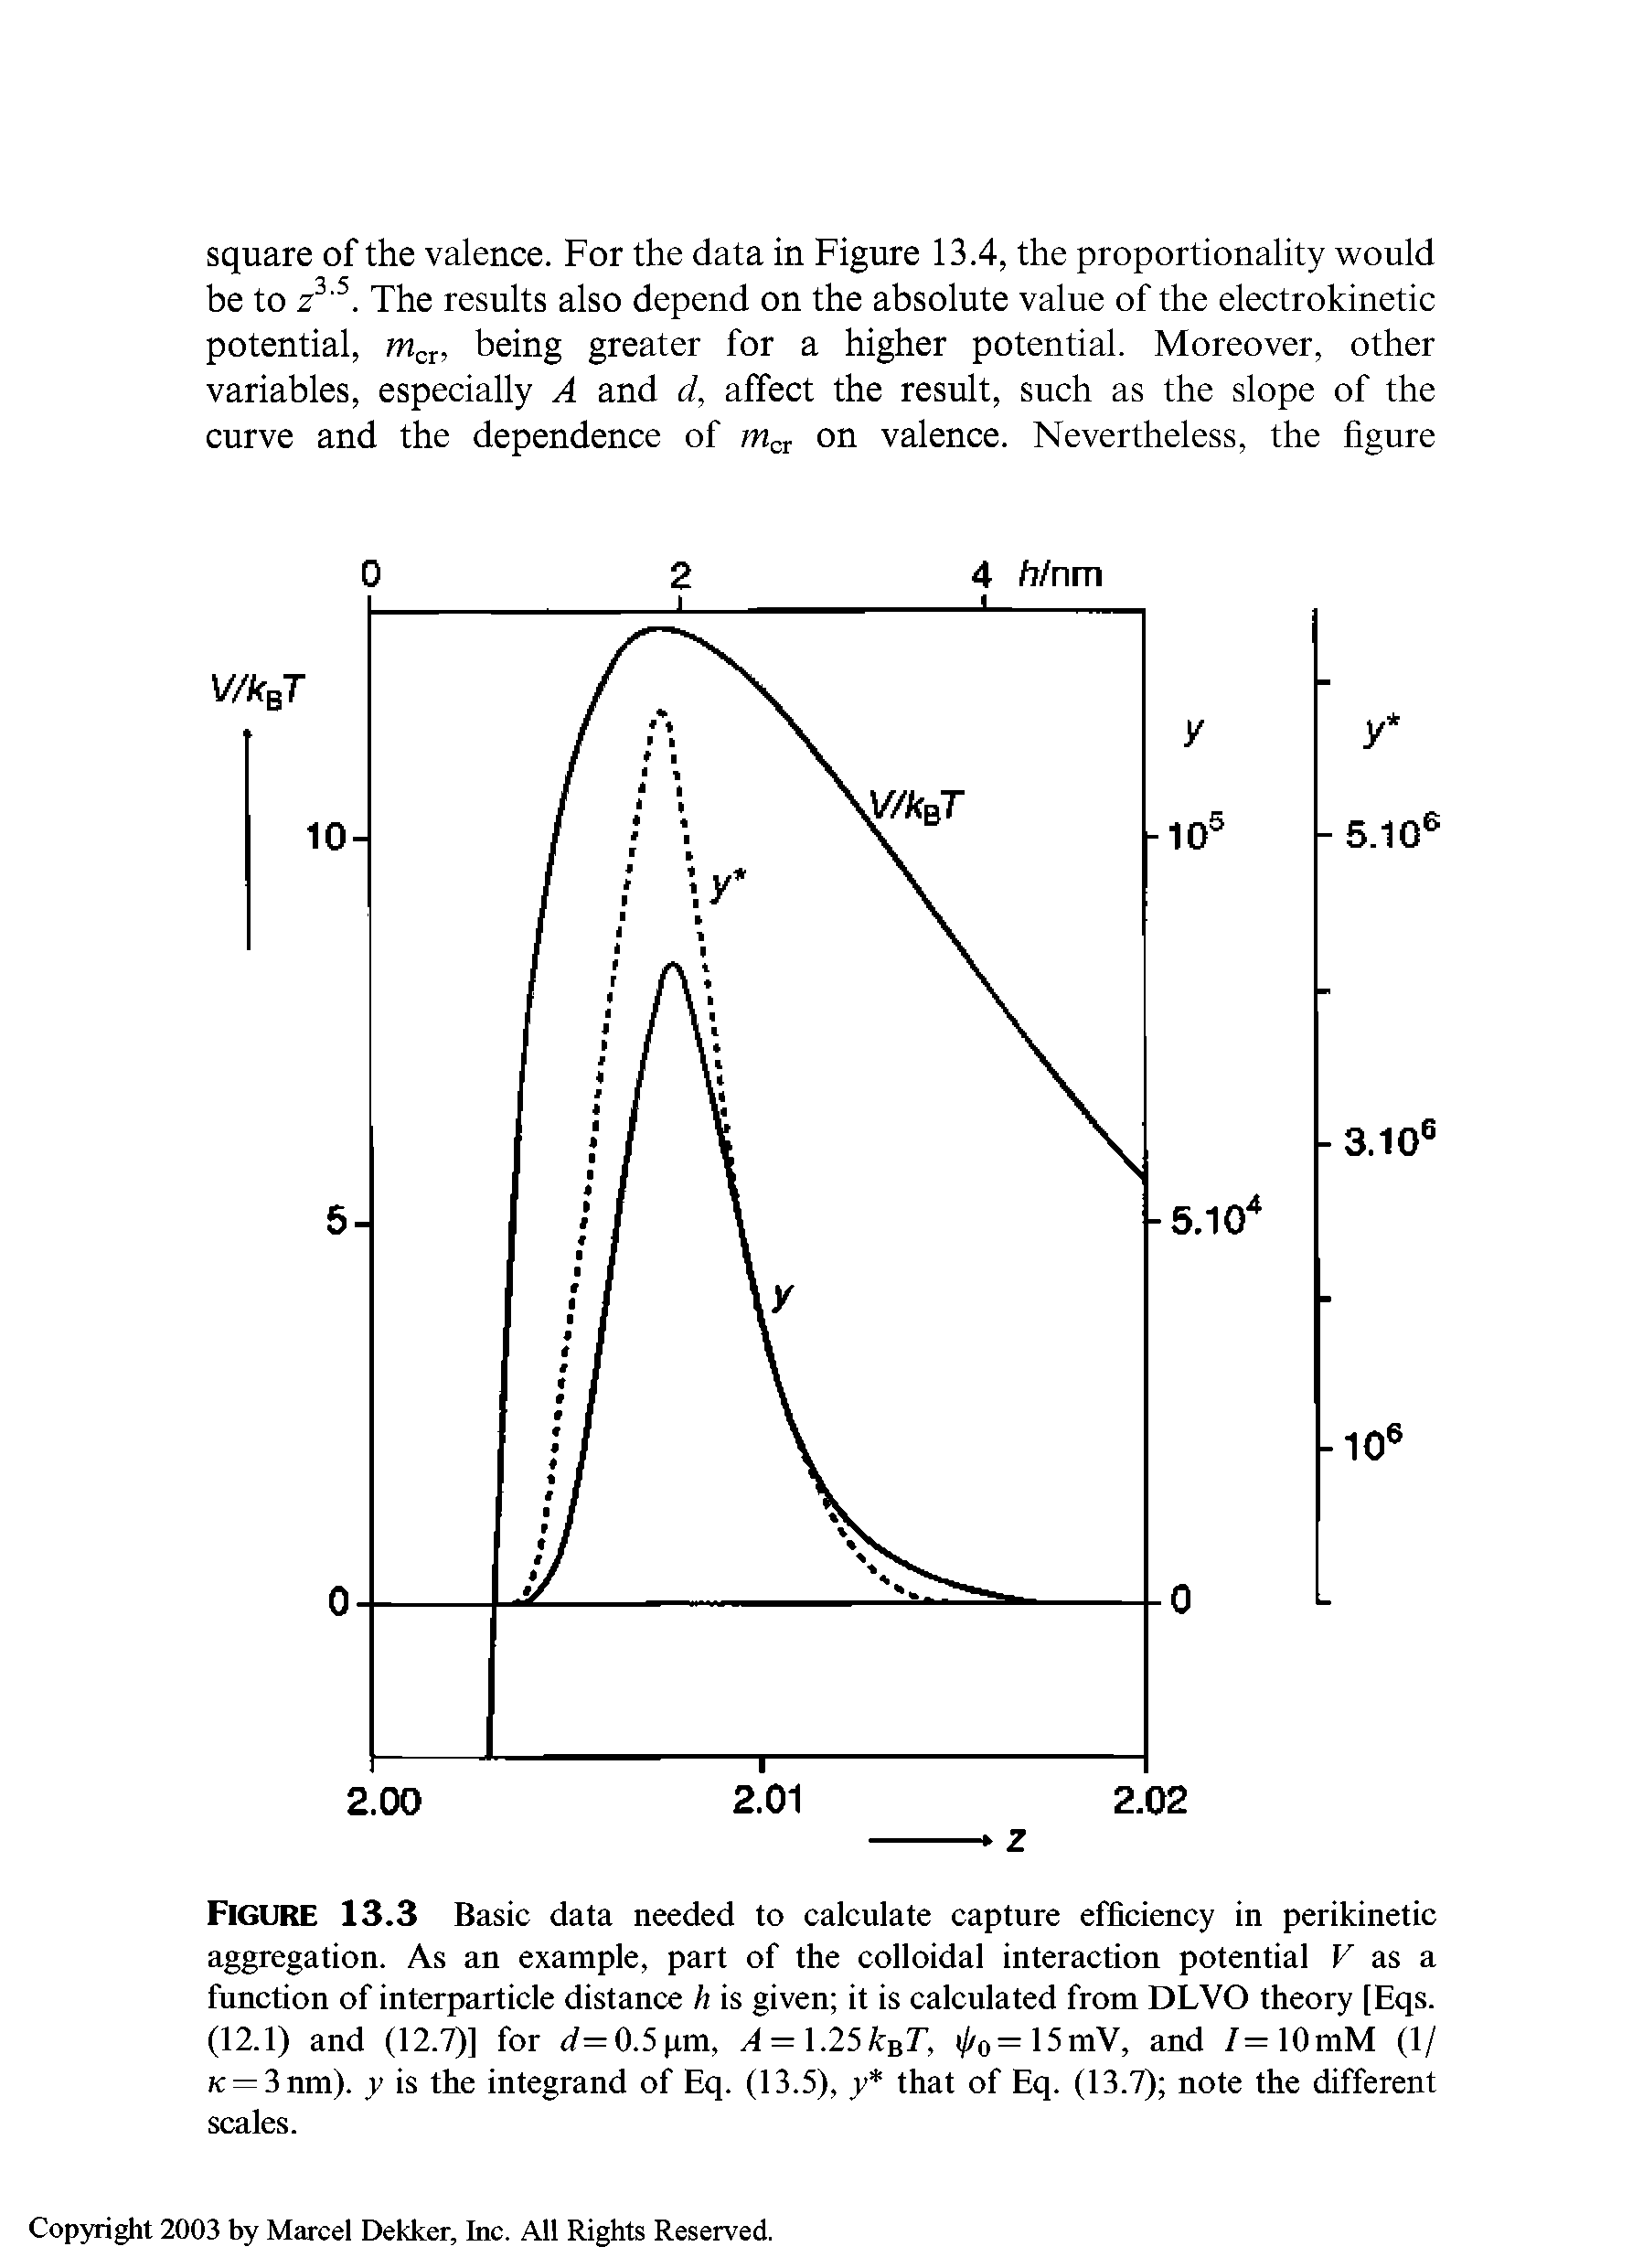 Figure 13.3 Basic data needed to calculate capture efficiency in perikinetic aggregation. As an example, part of the colloidal interaction potential V as a function of interparticle distance h is given it is calculated from DLVO theory [Eqs. (12.1) and (12.7)] for d=0.5pm, A =. 25kBT, i o=15mV, and 7=10mM (1/ K = 3nm). y is the integrand of Eq. (13.5), y that of Eq. (13.7) note the different scales.